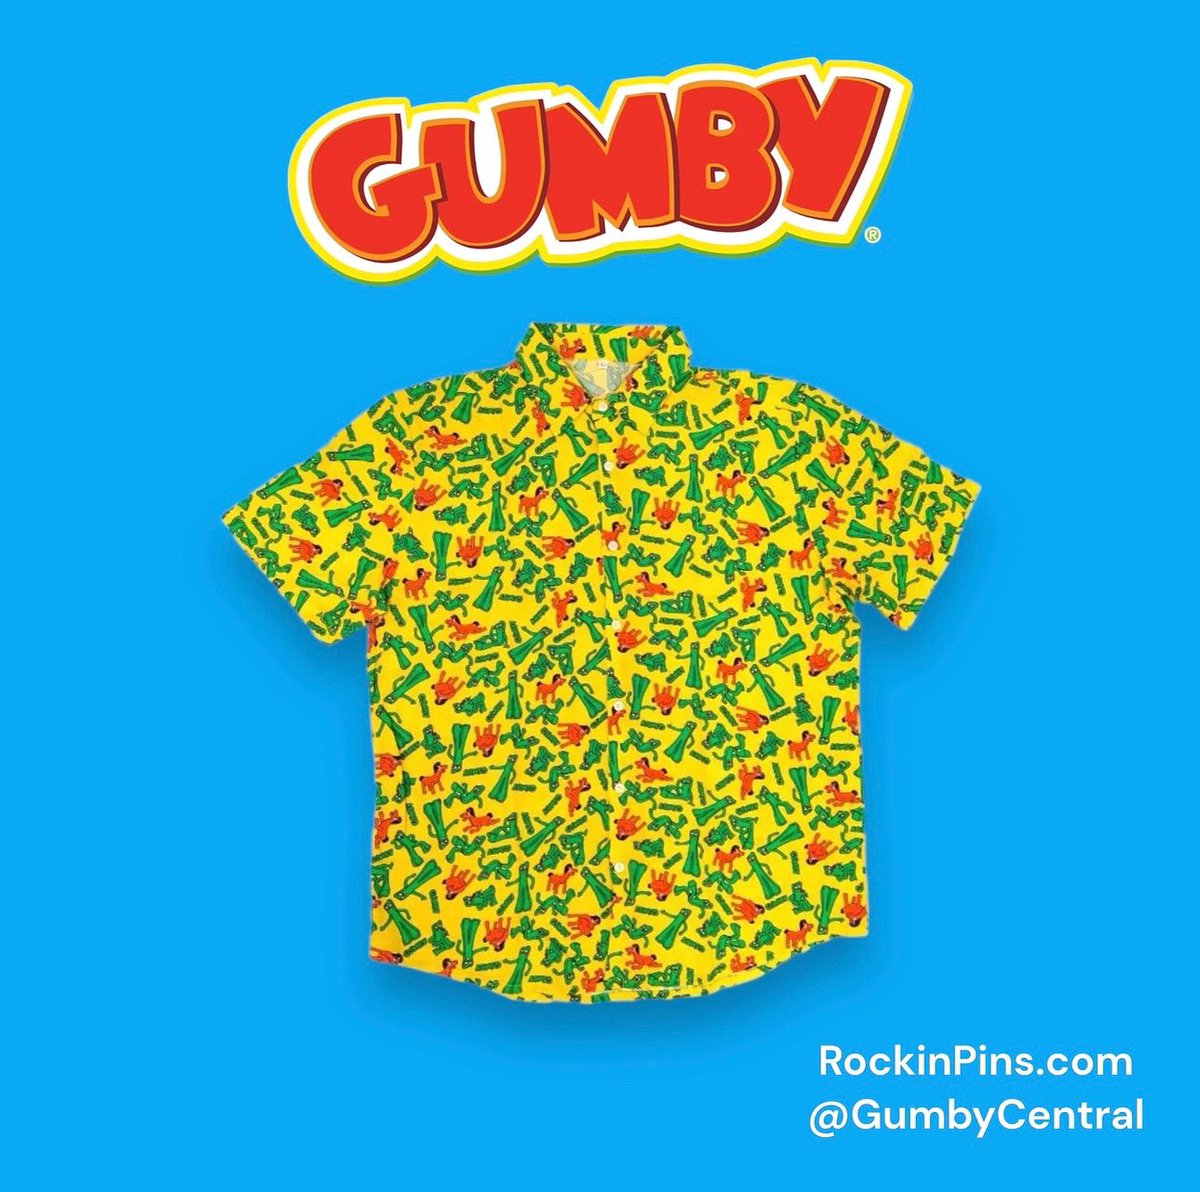 🟢Gumby🟢 New soft button up shirt available now at rockinpins.com/product/gumby-… #gumby #gumbyandpokey #artclokey #stopmotion #stopmotionanimation #animation #pokey #clay #claymation #buttonup